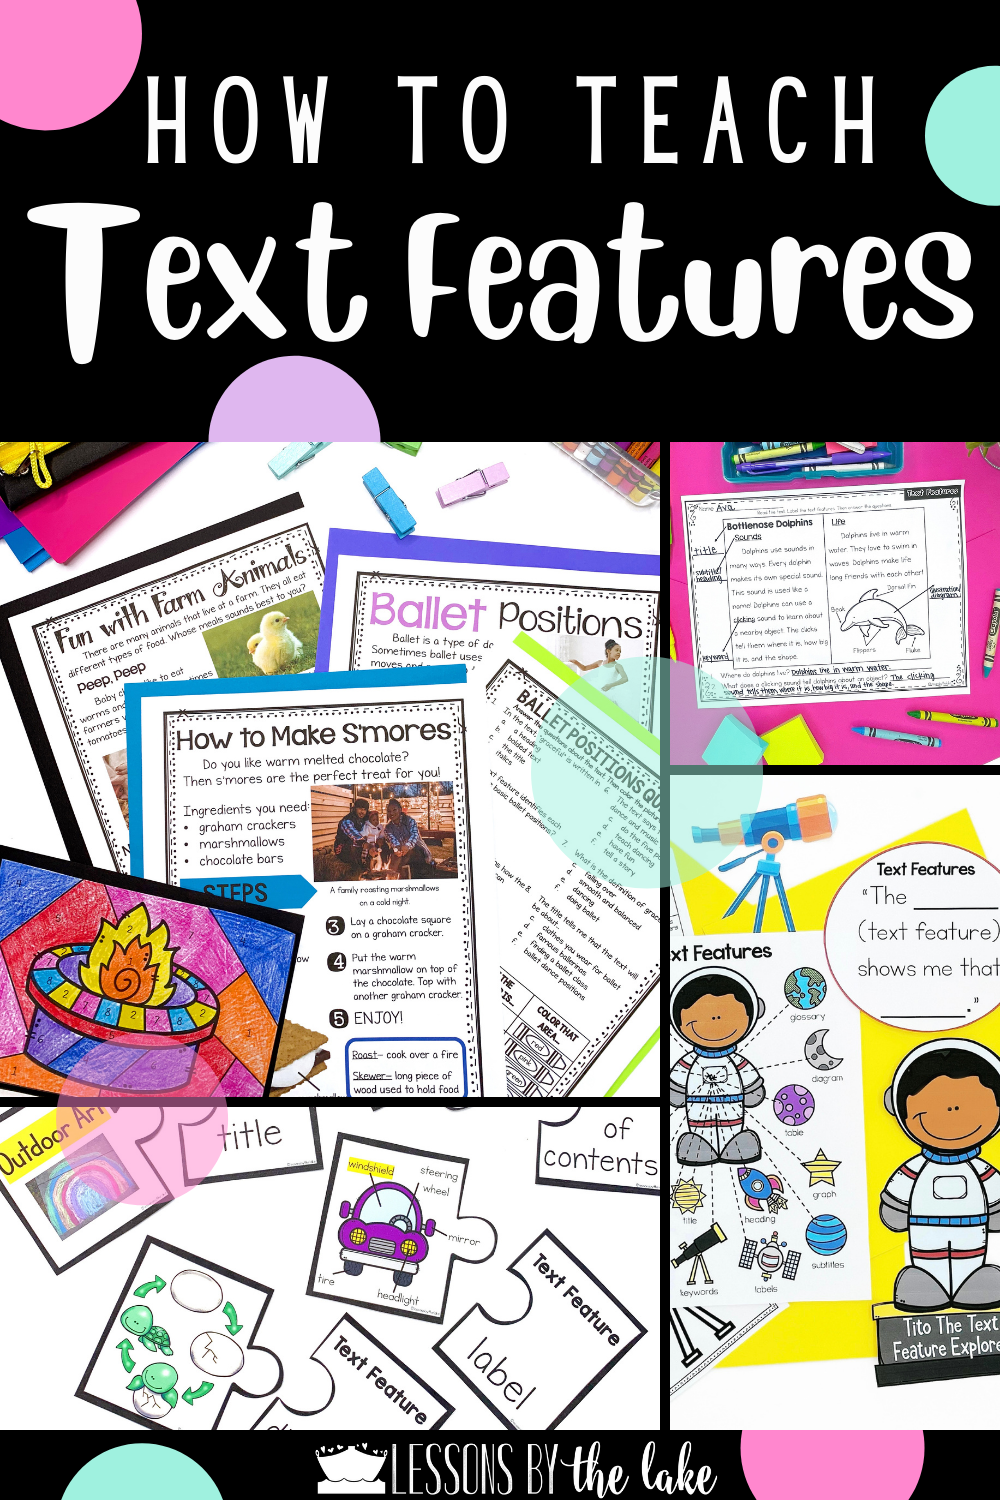 Text features - Bold print and glossary 